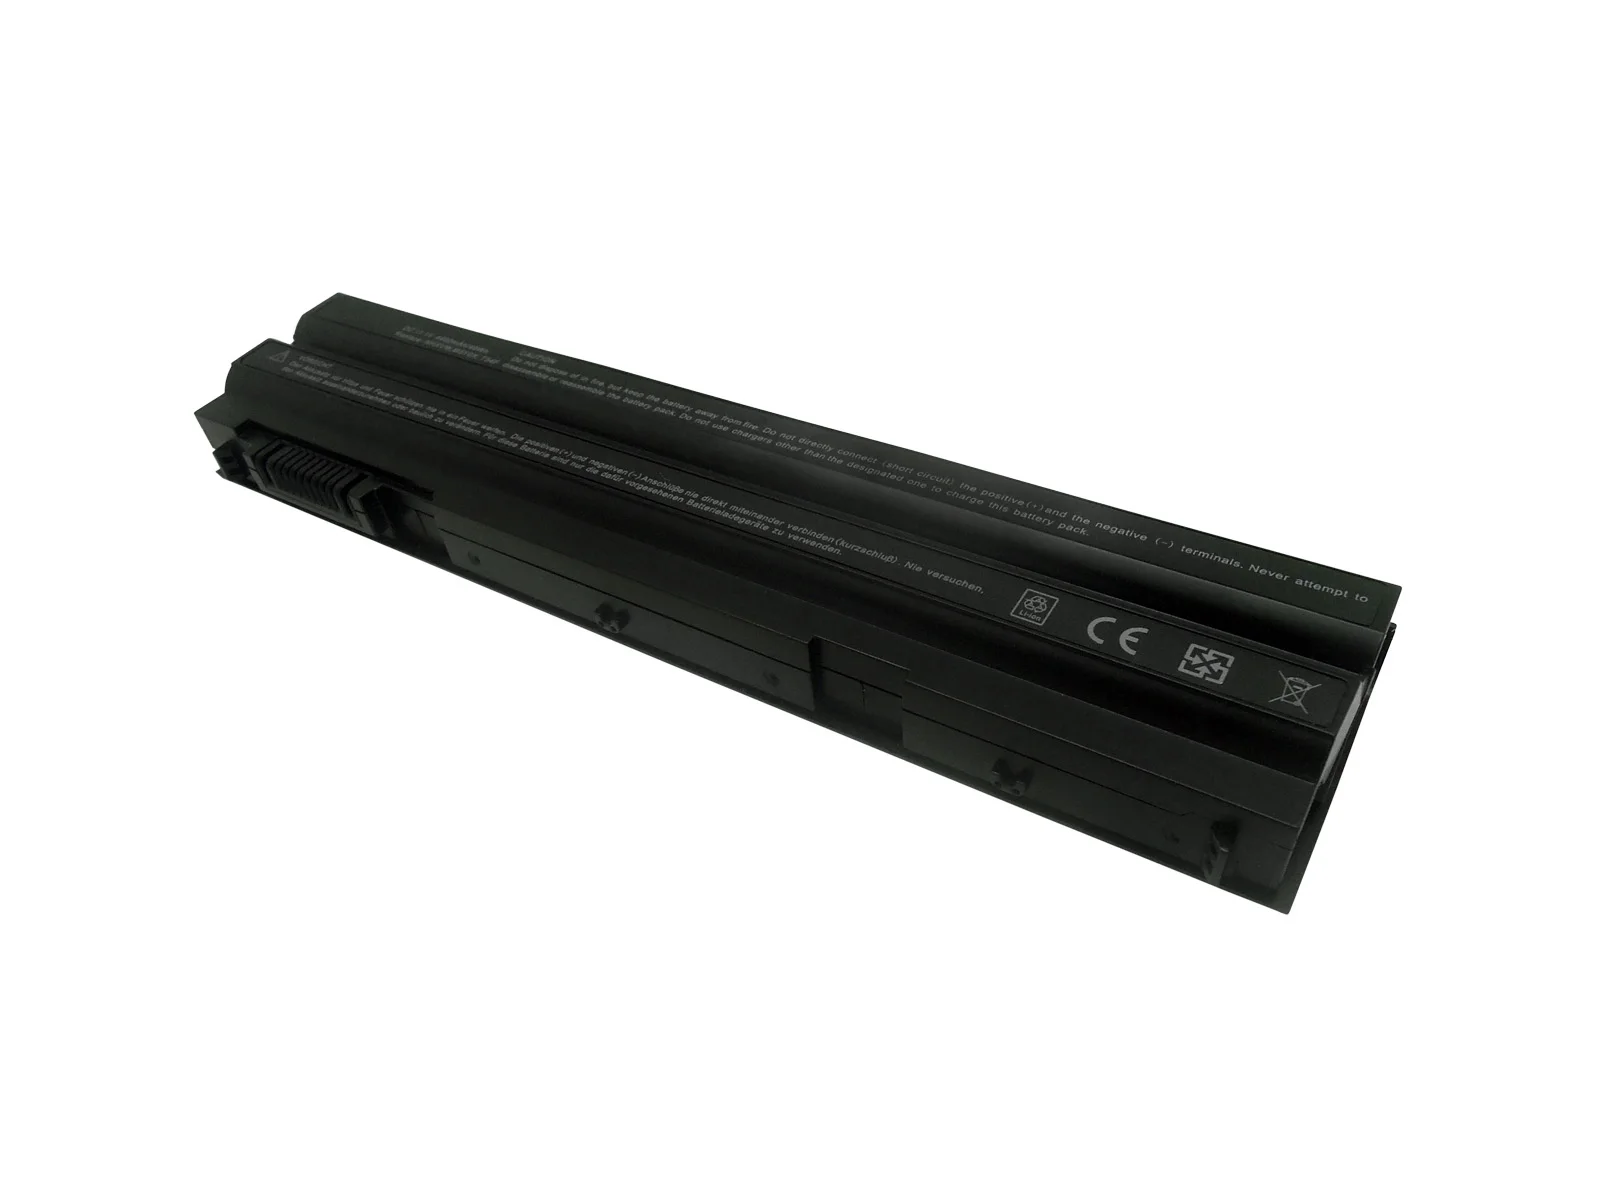 6cell Oem New Laptop Battery For Dell Inspiron 15r 75 55 17r 57 17r 77 E64 E65 E54 E6530 E6440 58x Series Buy Battery For Dell Inspiron 15r Laptop Battery For Dell